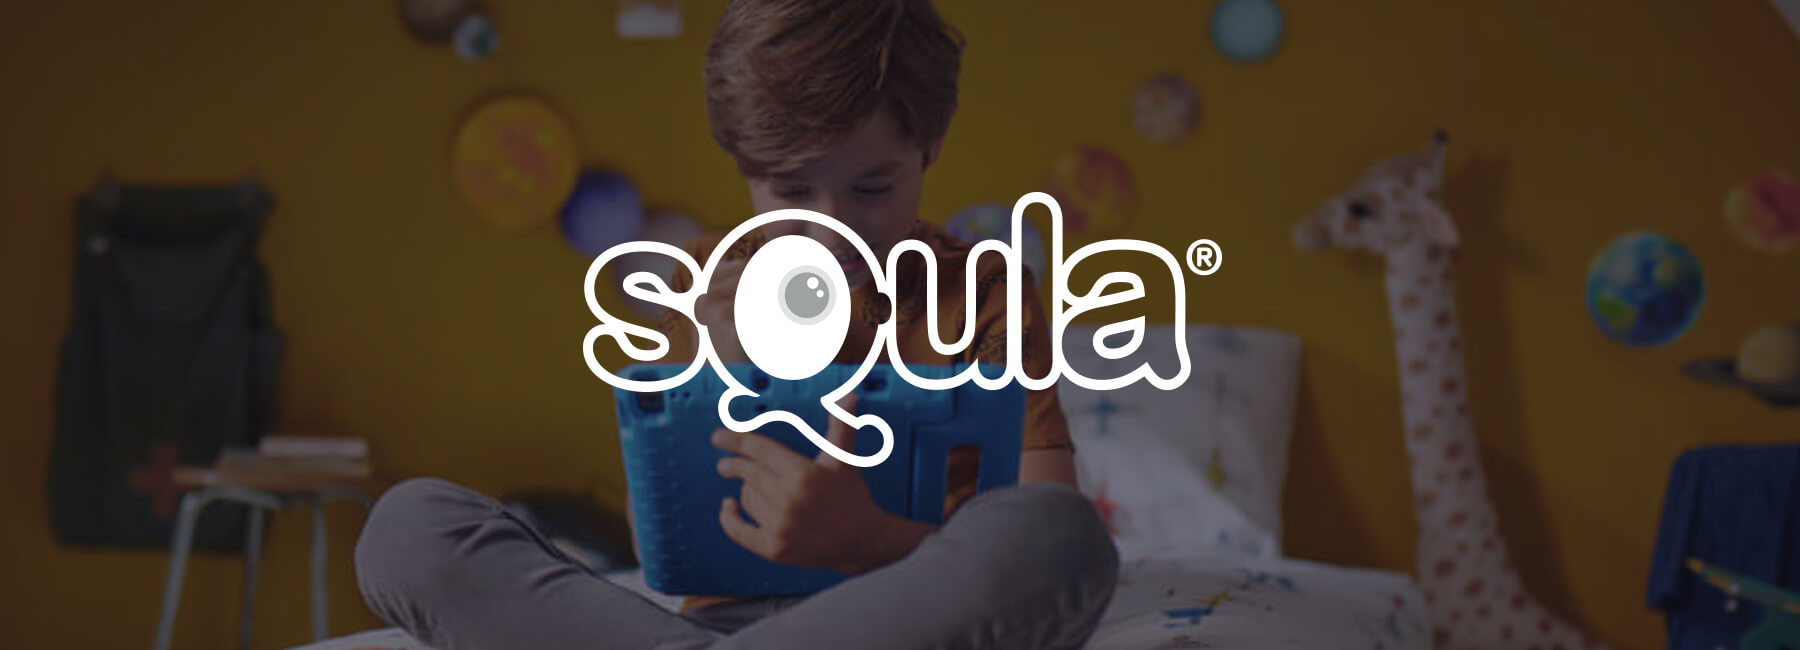 Squla to increase newsletter engagement with feedback